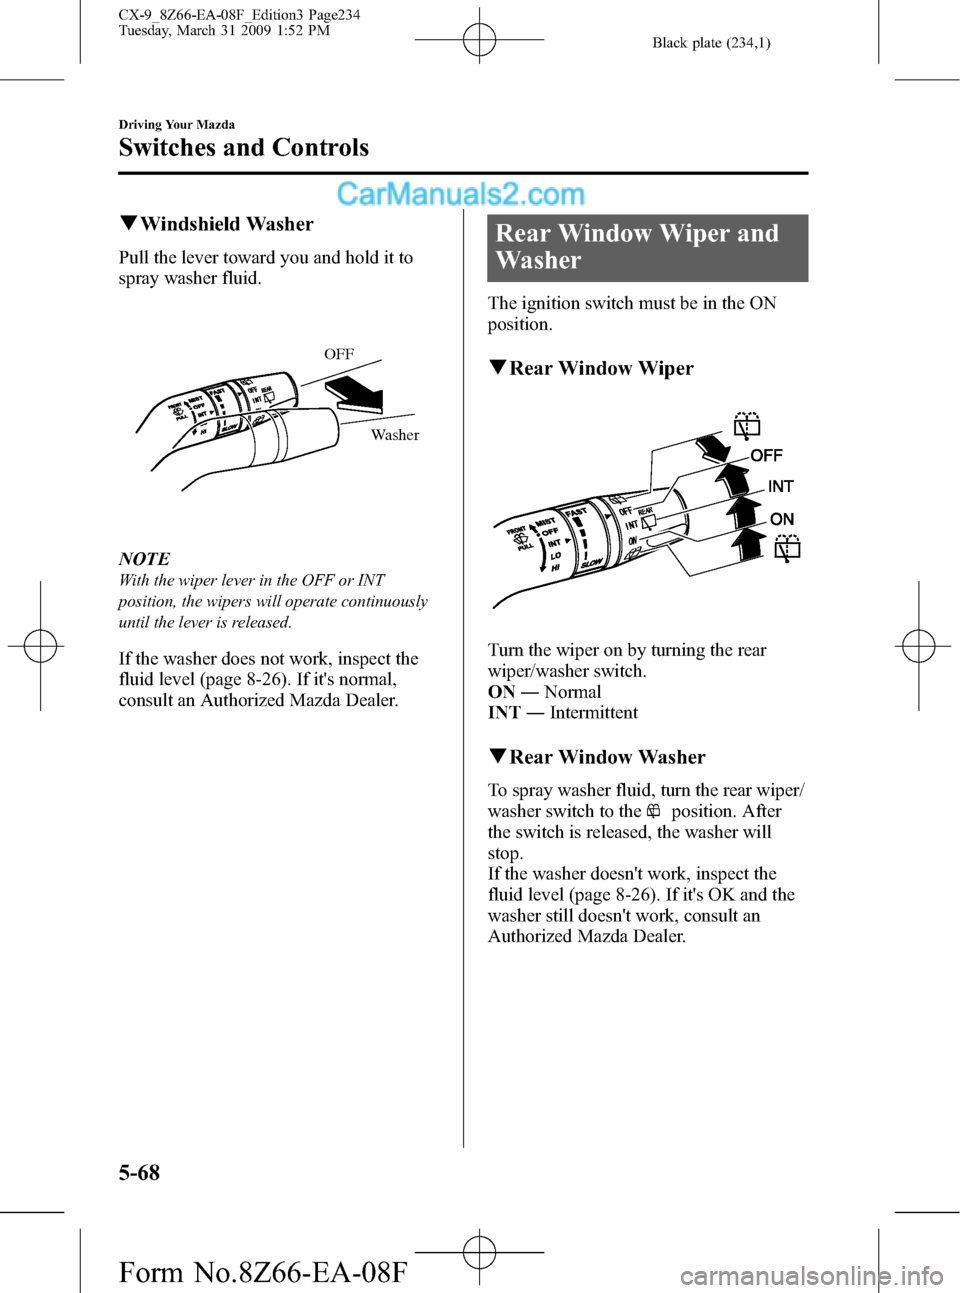 MAZDA MODEL CX-9 2009  Owners Manual (in English) Black plate (234,1)
qWindshield Washer
Pull the lever toward you and hold it to
spray washer fluid.
OFF
Washer
NOTE
With the wiper lever in the OFF or INT
position, the wipers will operate continuousl